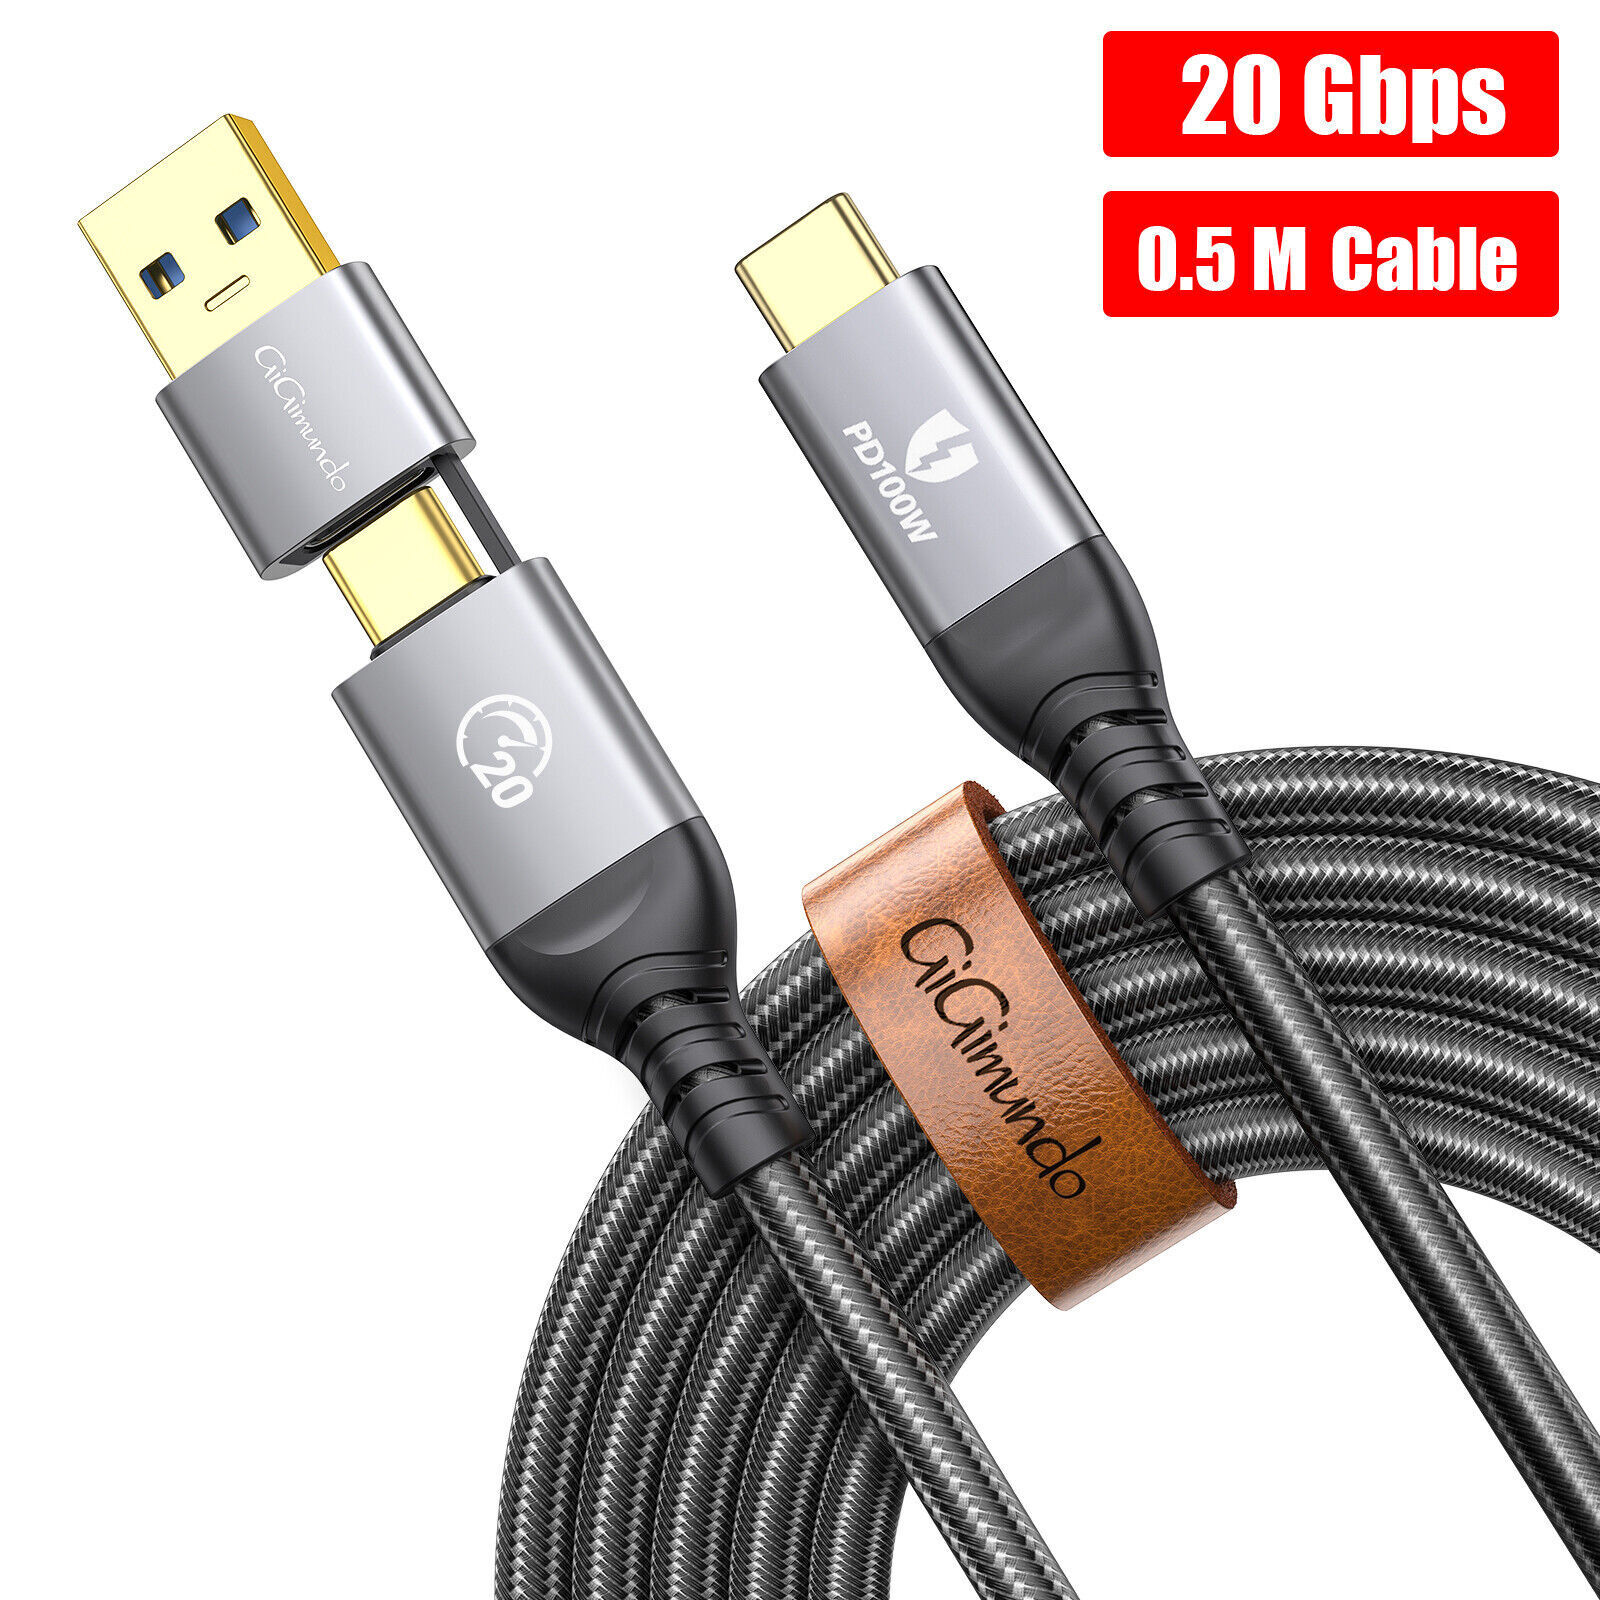 2 in 1 USB 3.2 Gen 2x2 Charger Cable USB A/C to USB-C Type-C Fast Charging 1.6ft